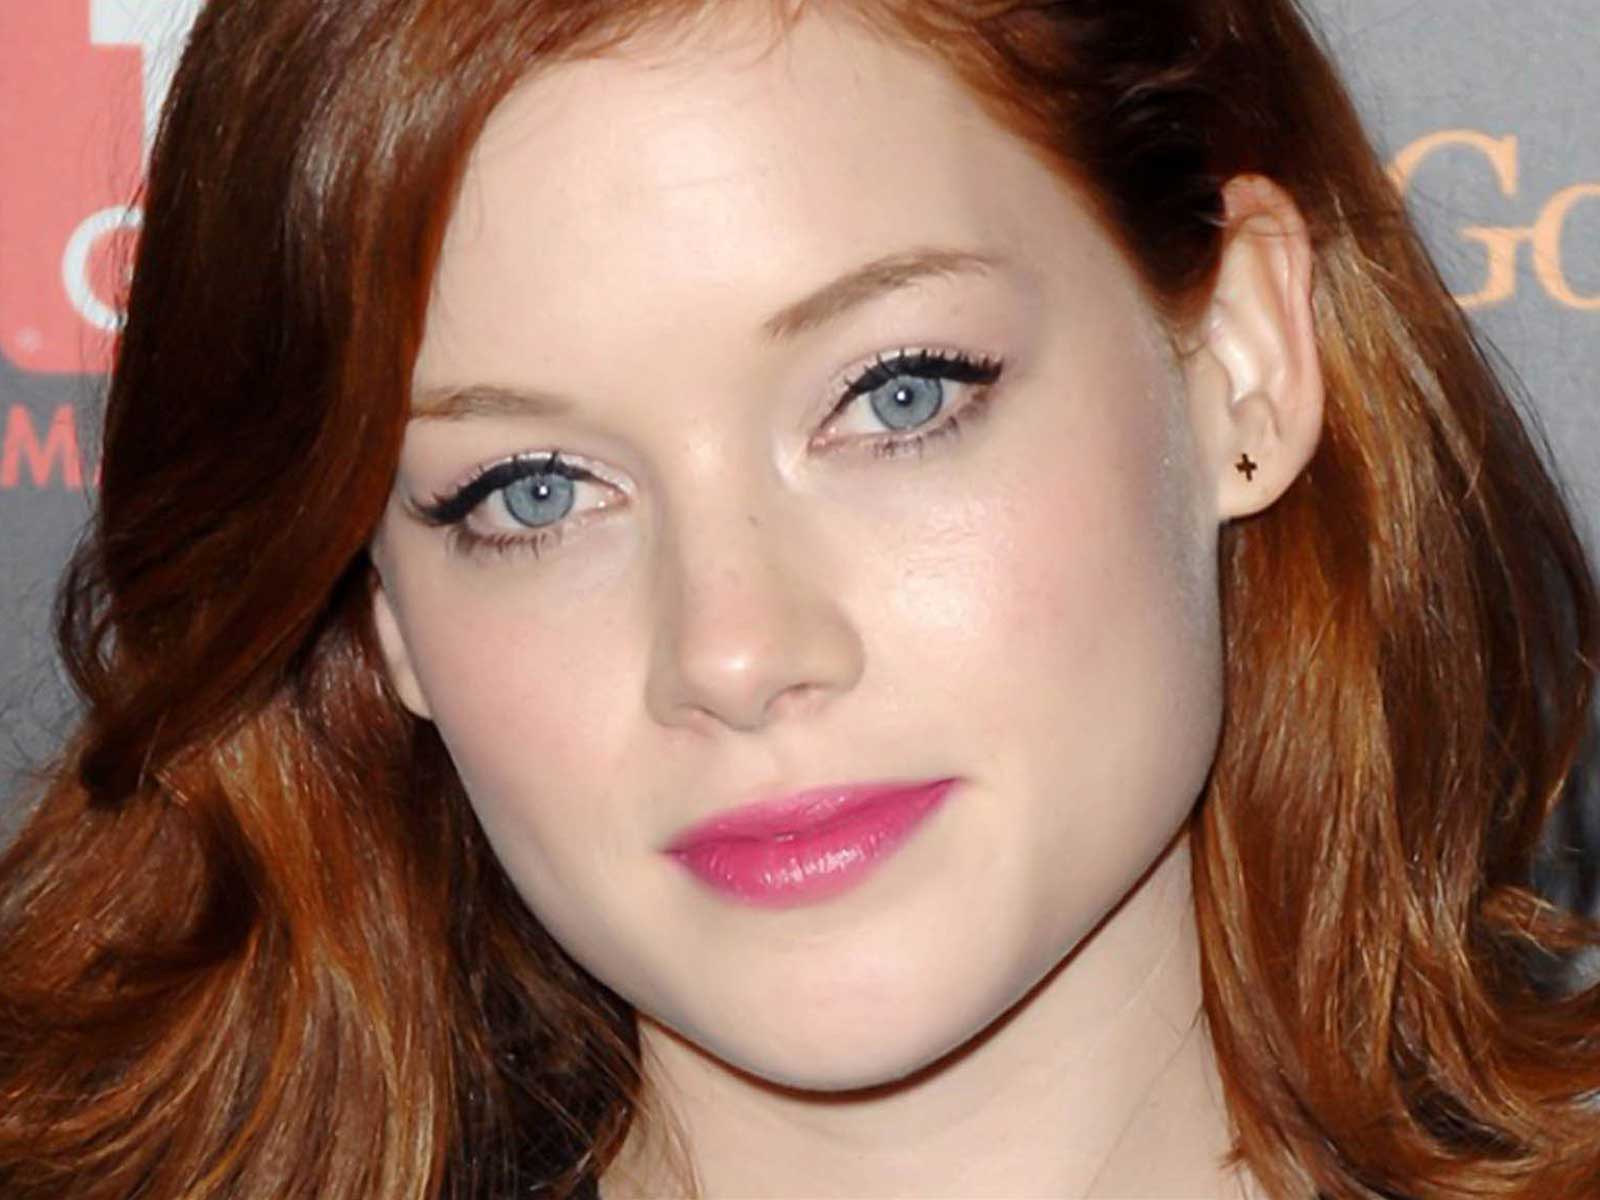 General photo of Jane Levy